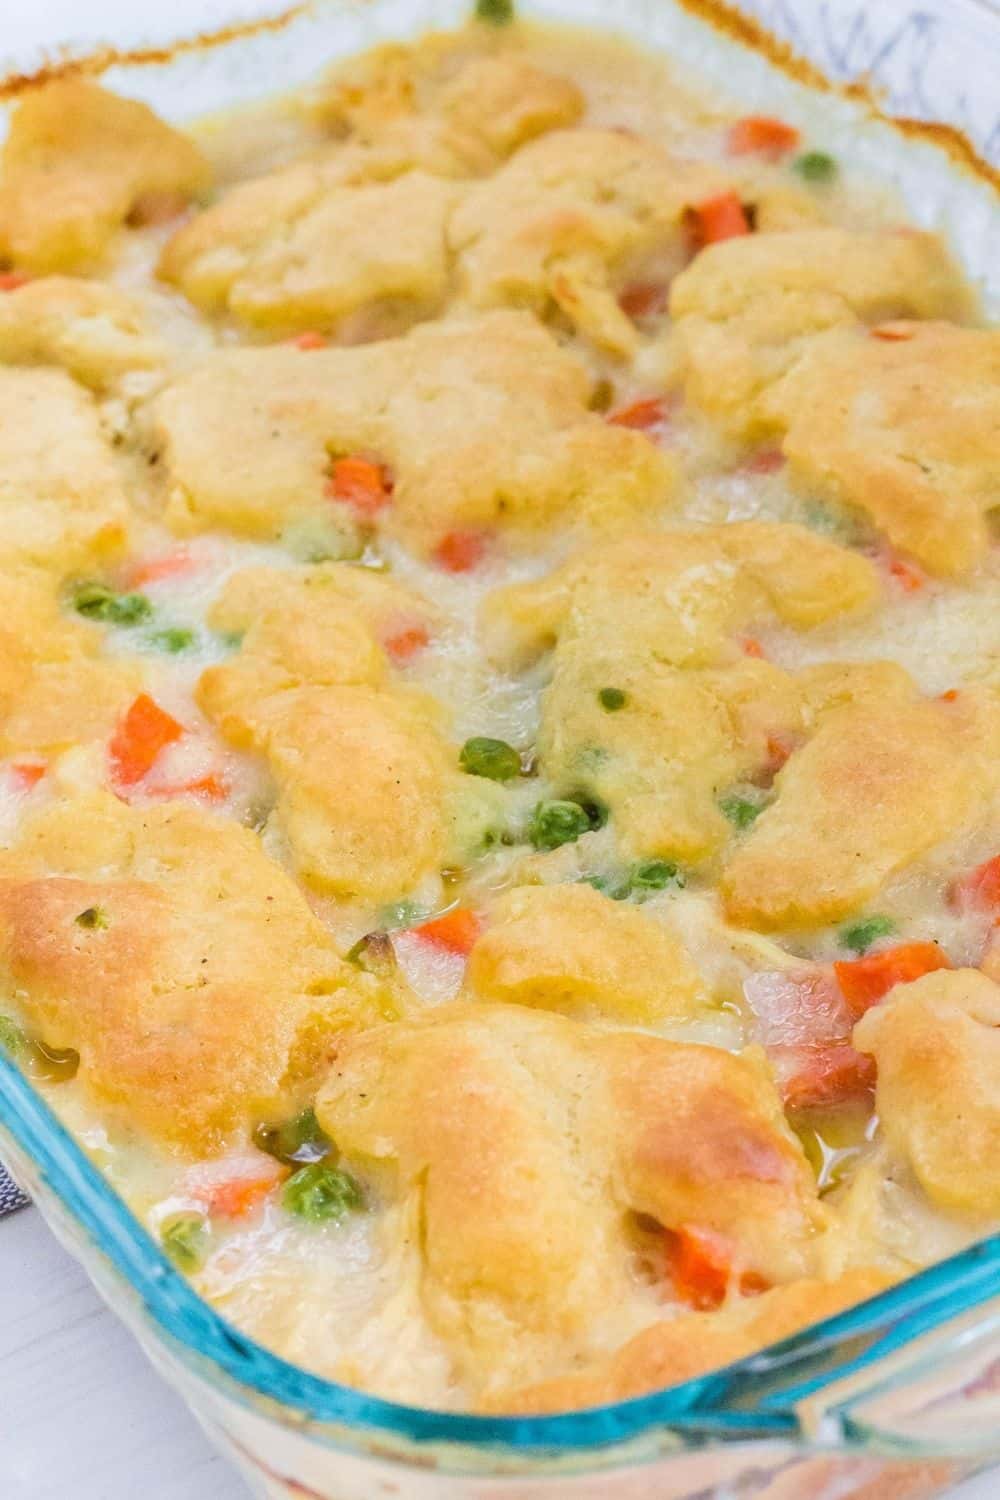 chicken and dumplings casserole baked in the oven